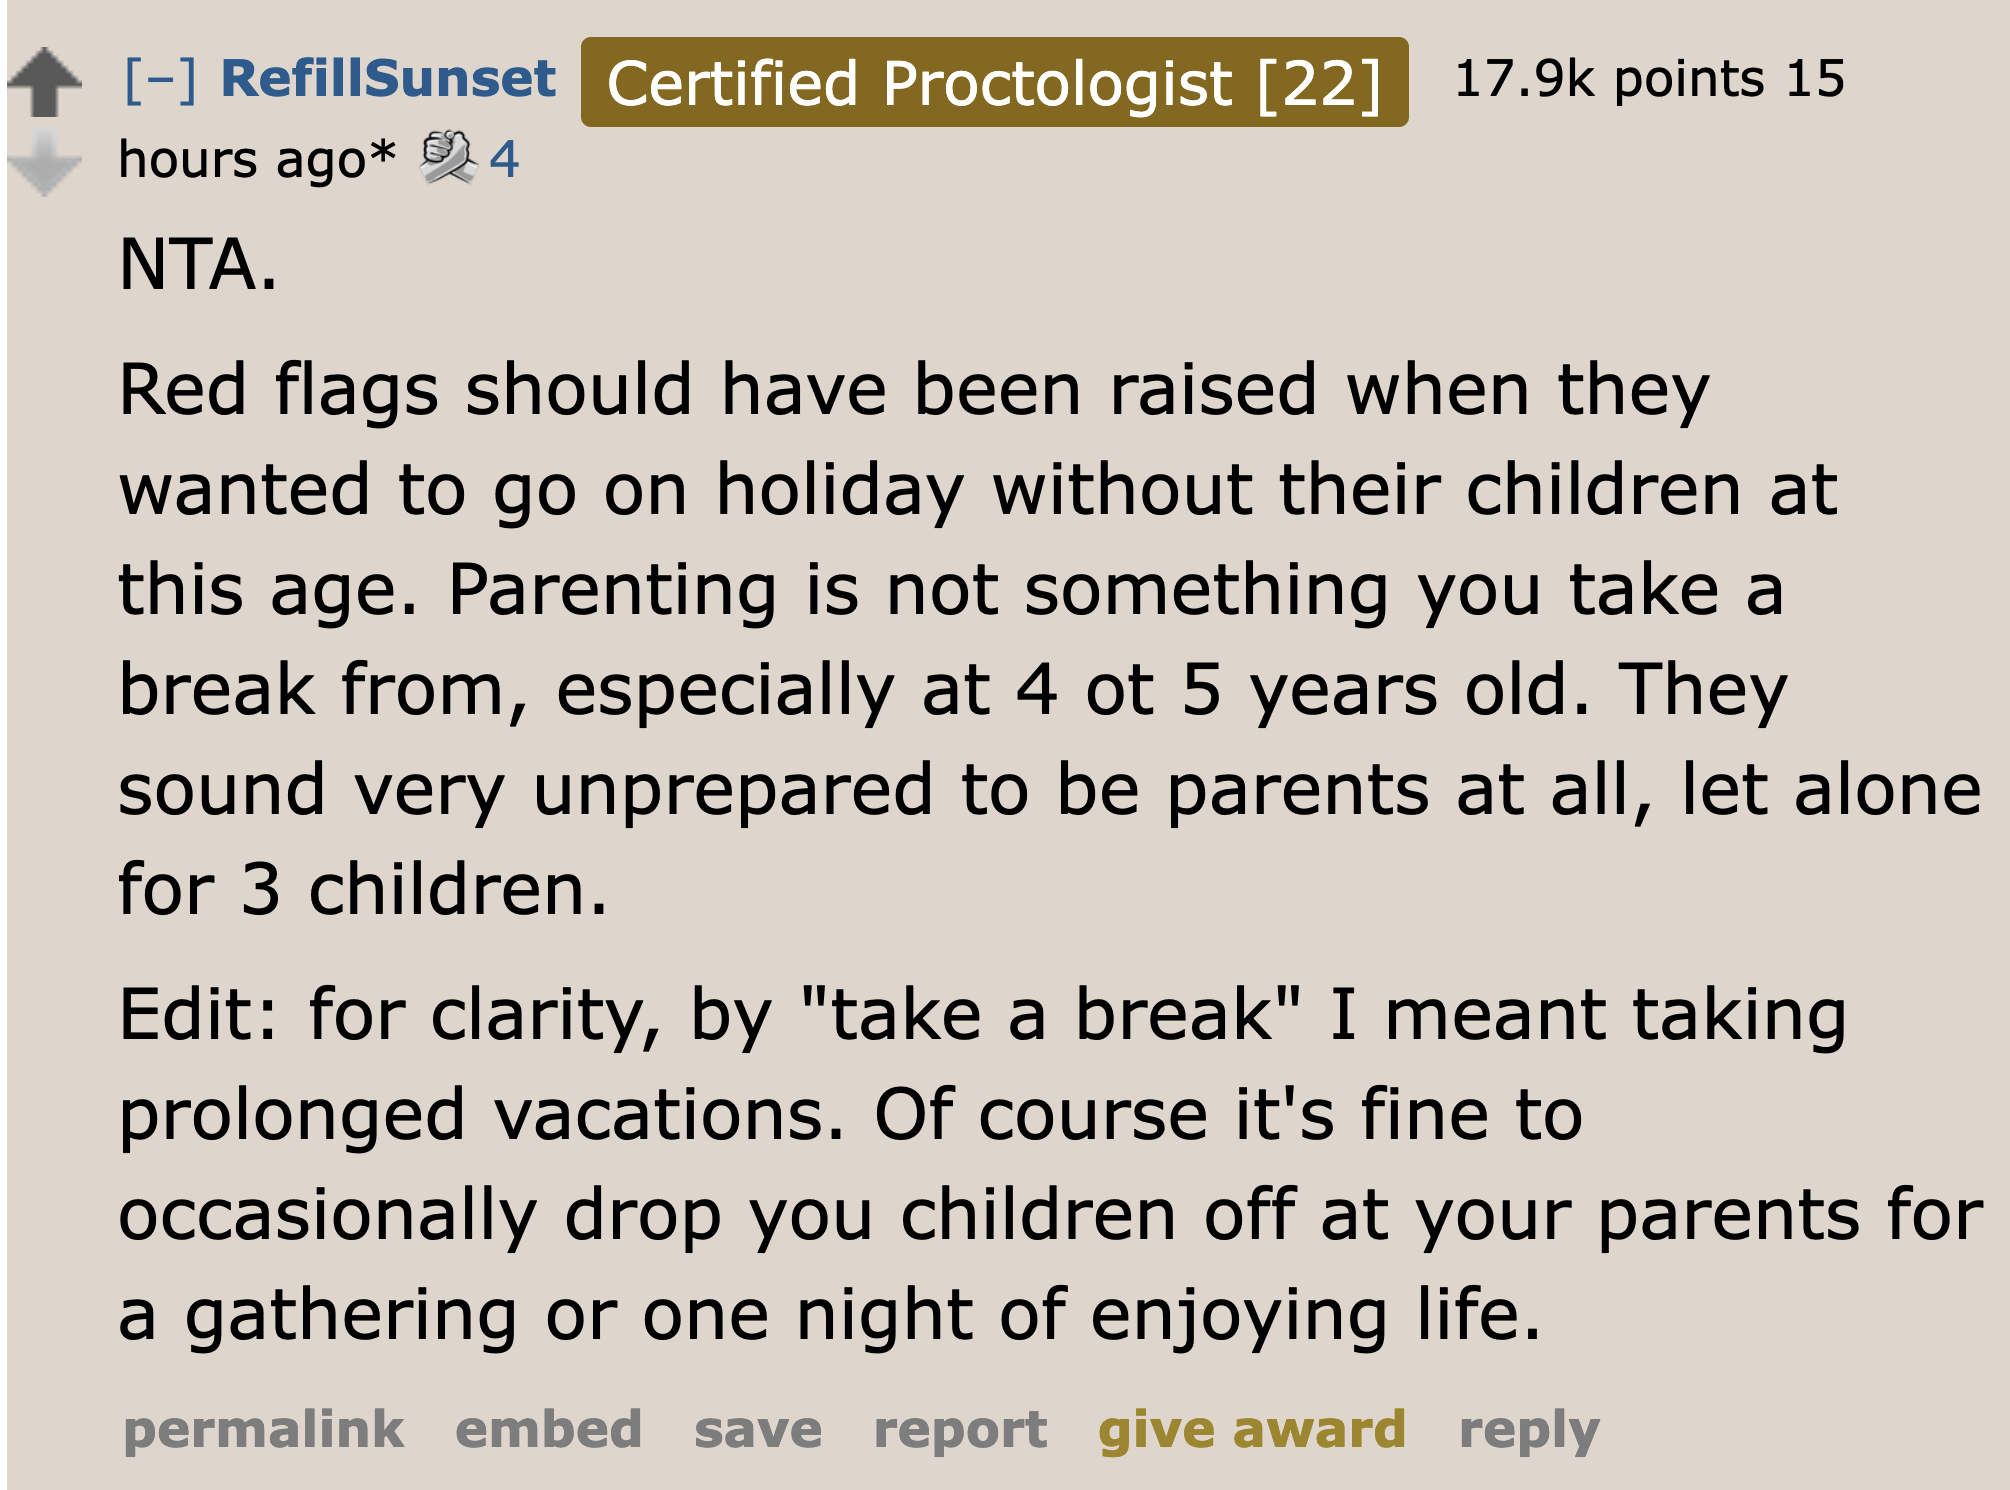 AITA not wanting to raise children's children - document - Refill Sunset Certified Proctologist 22 points 15 hours ago 4 Nta. Red flags should have been raised when they wanted to go on holiday without their children at this age. Parenting is not somethin